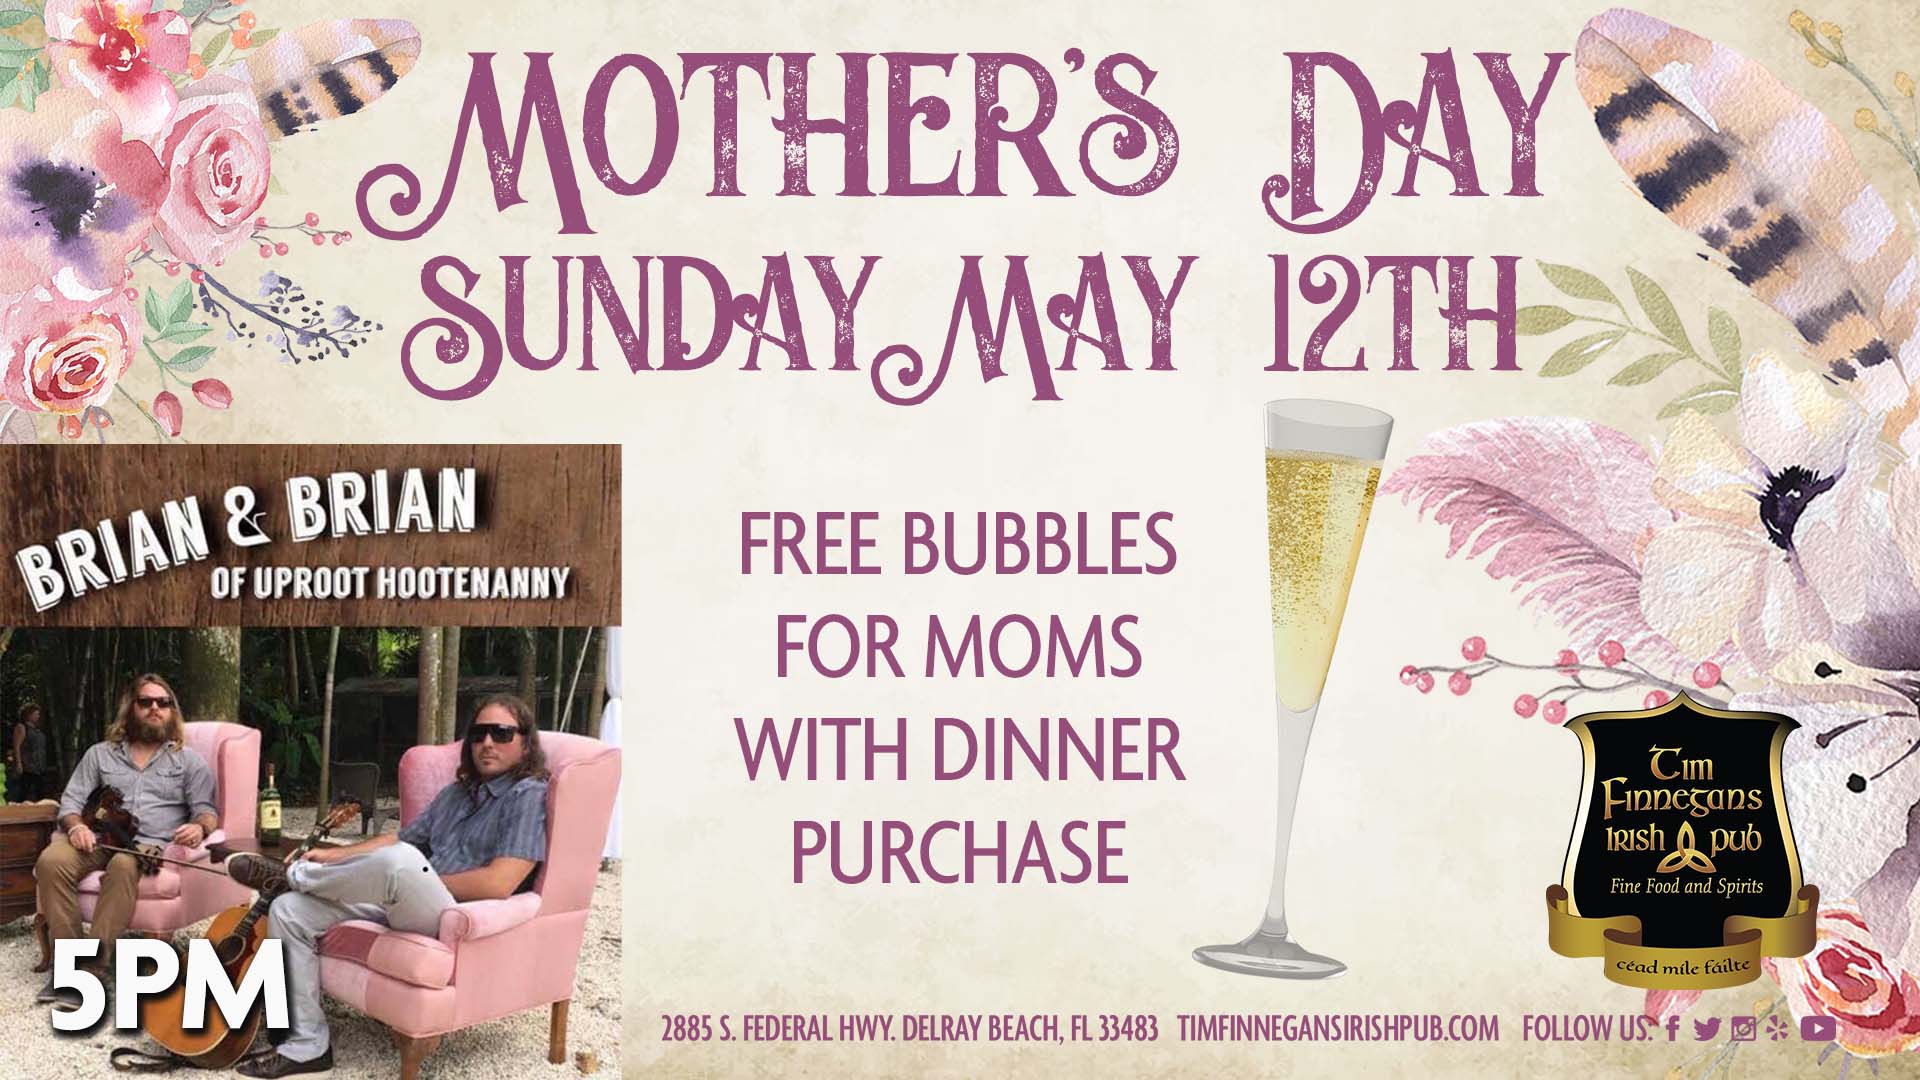 Mothers Day May 12th - Moms get free bubbles with purchase of Dinner - Live Music at 5PM with Brian & Brian